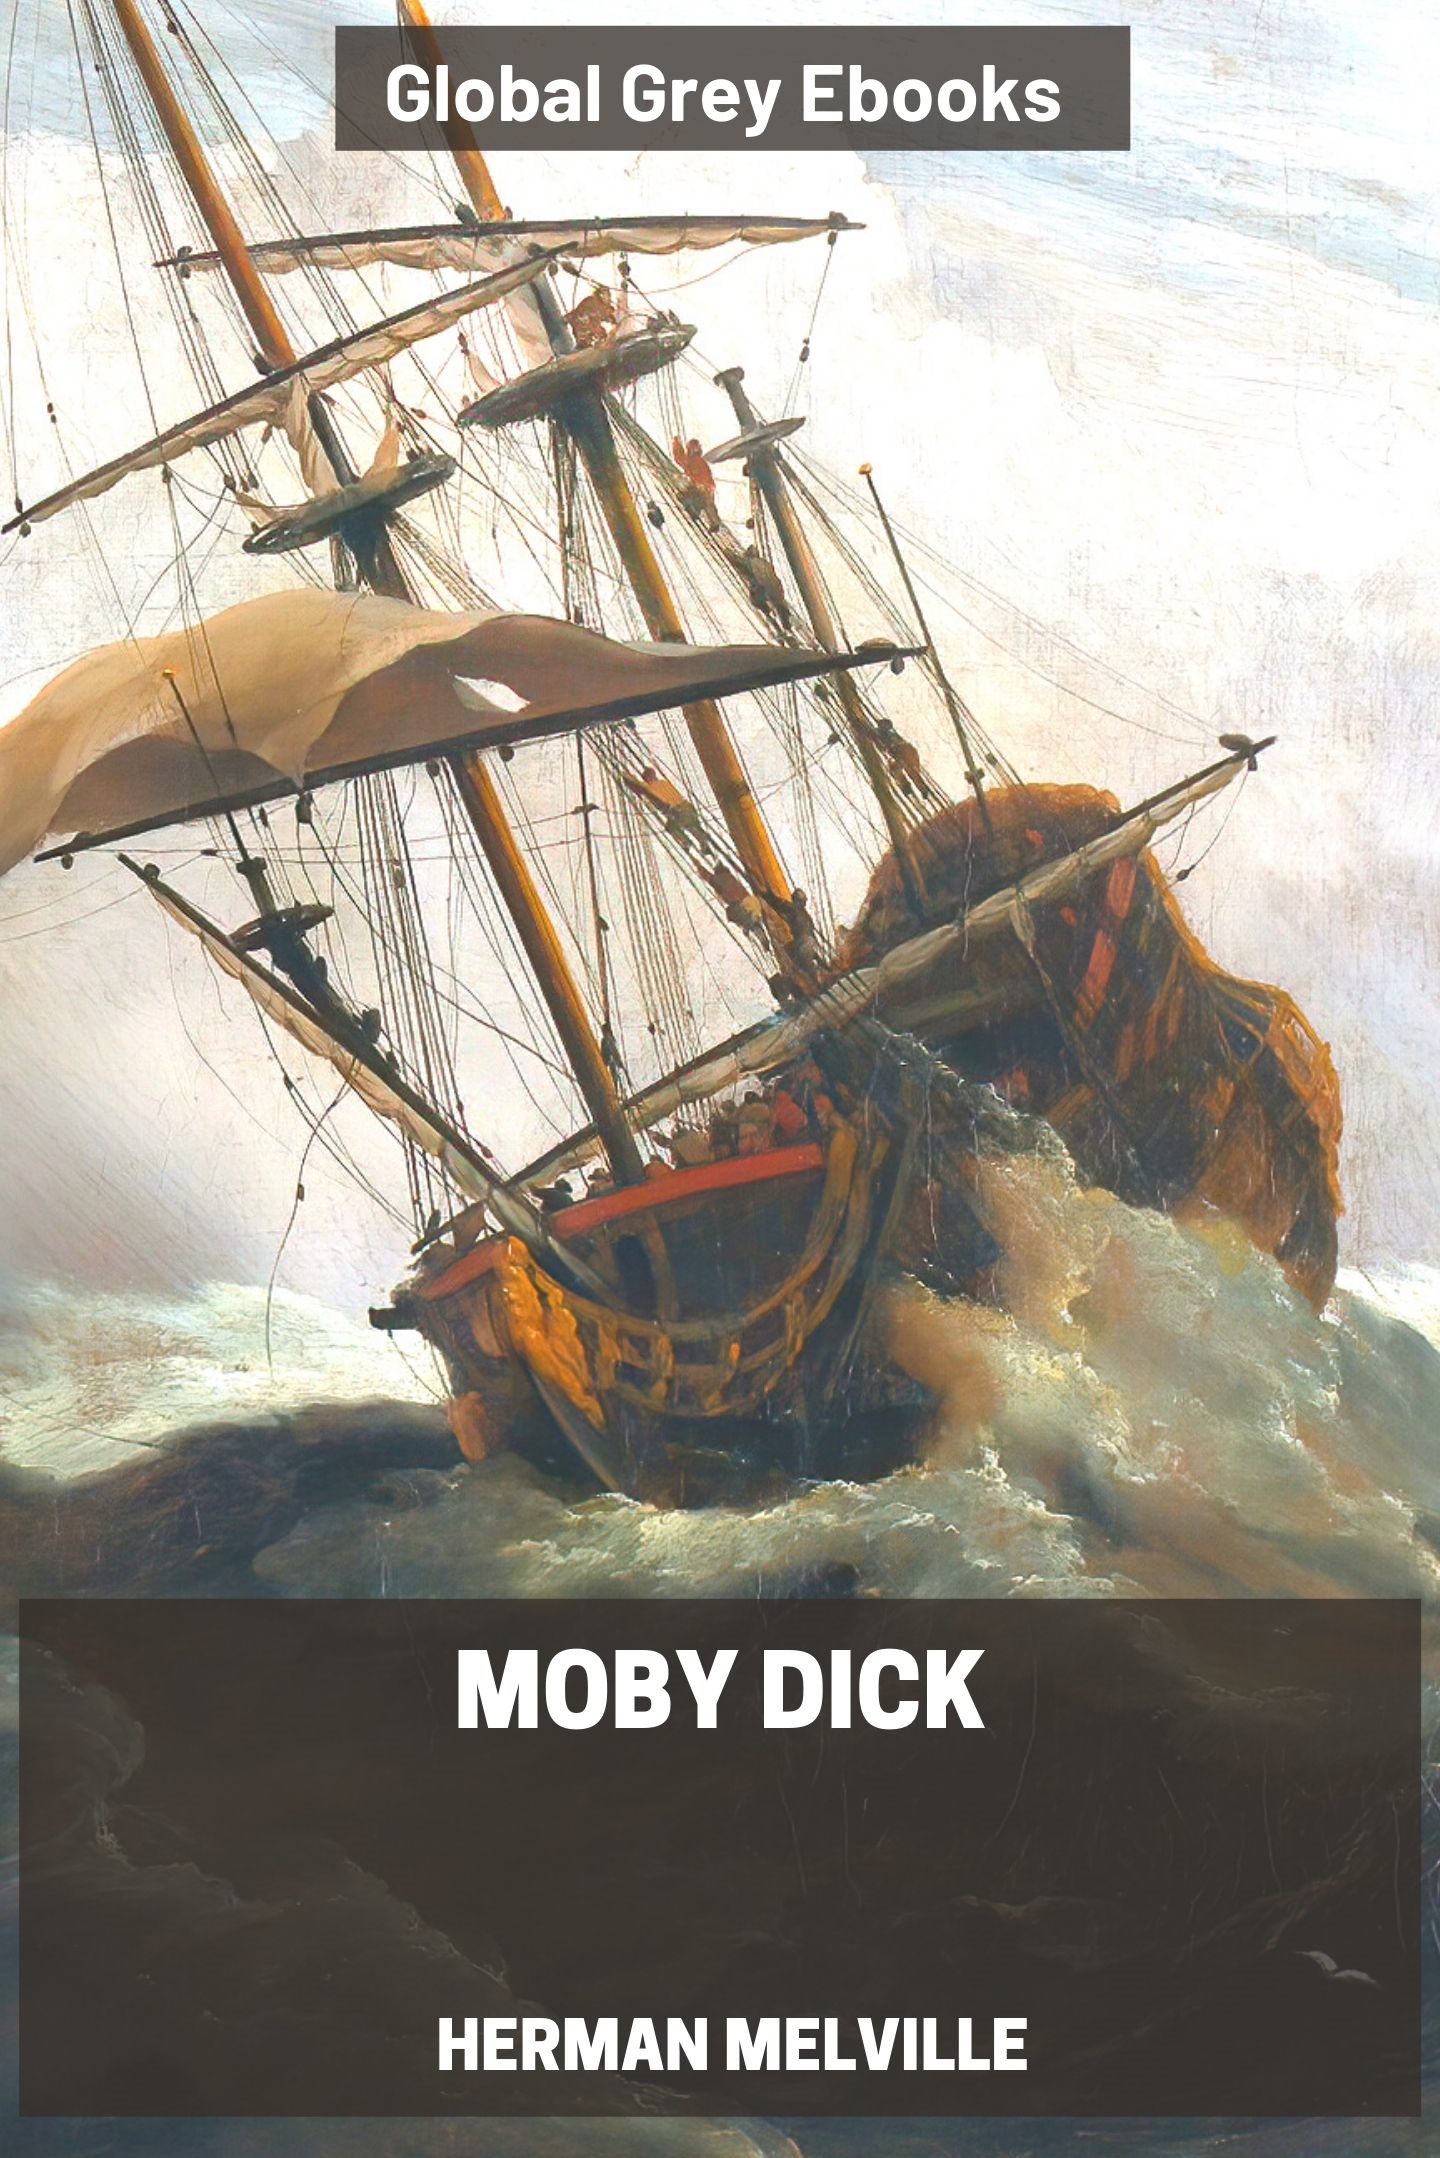 Moby Dick by Herman Melville - Complete text online - Global Grey ebooks